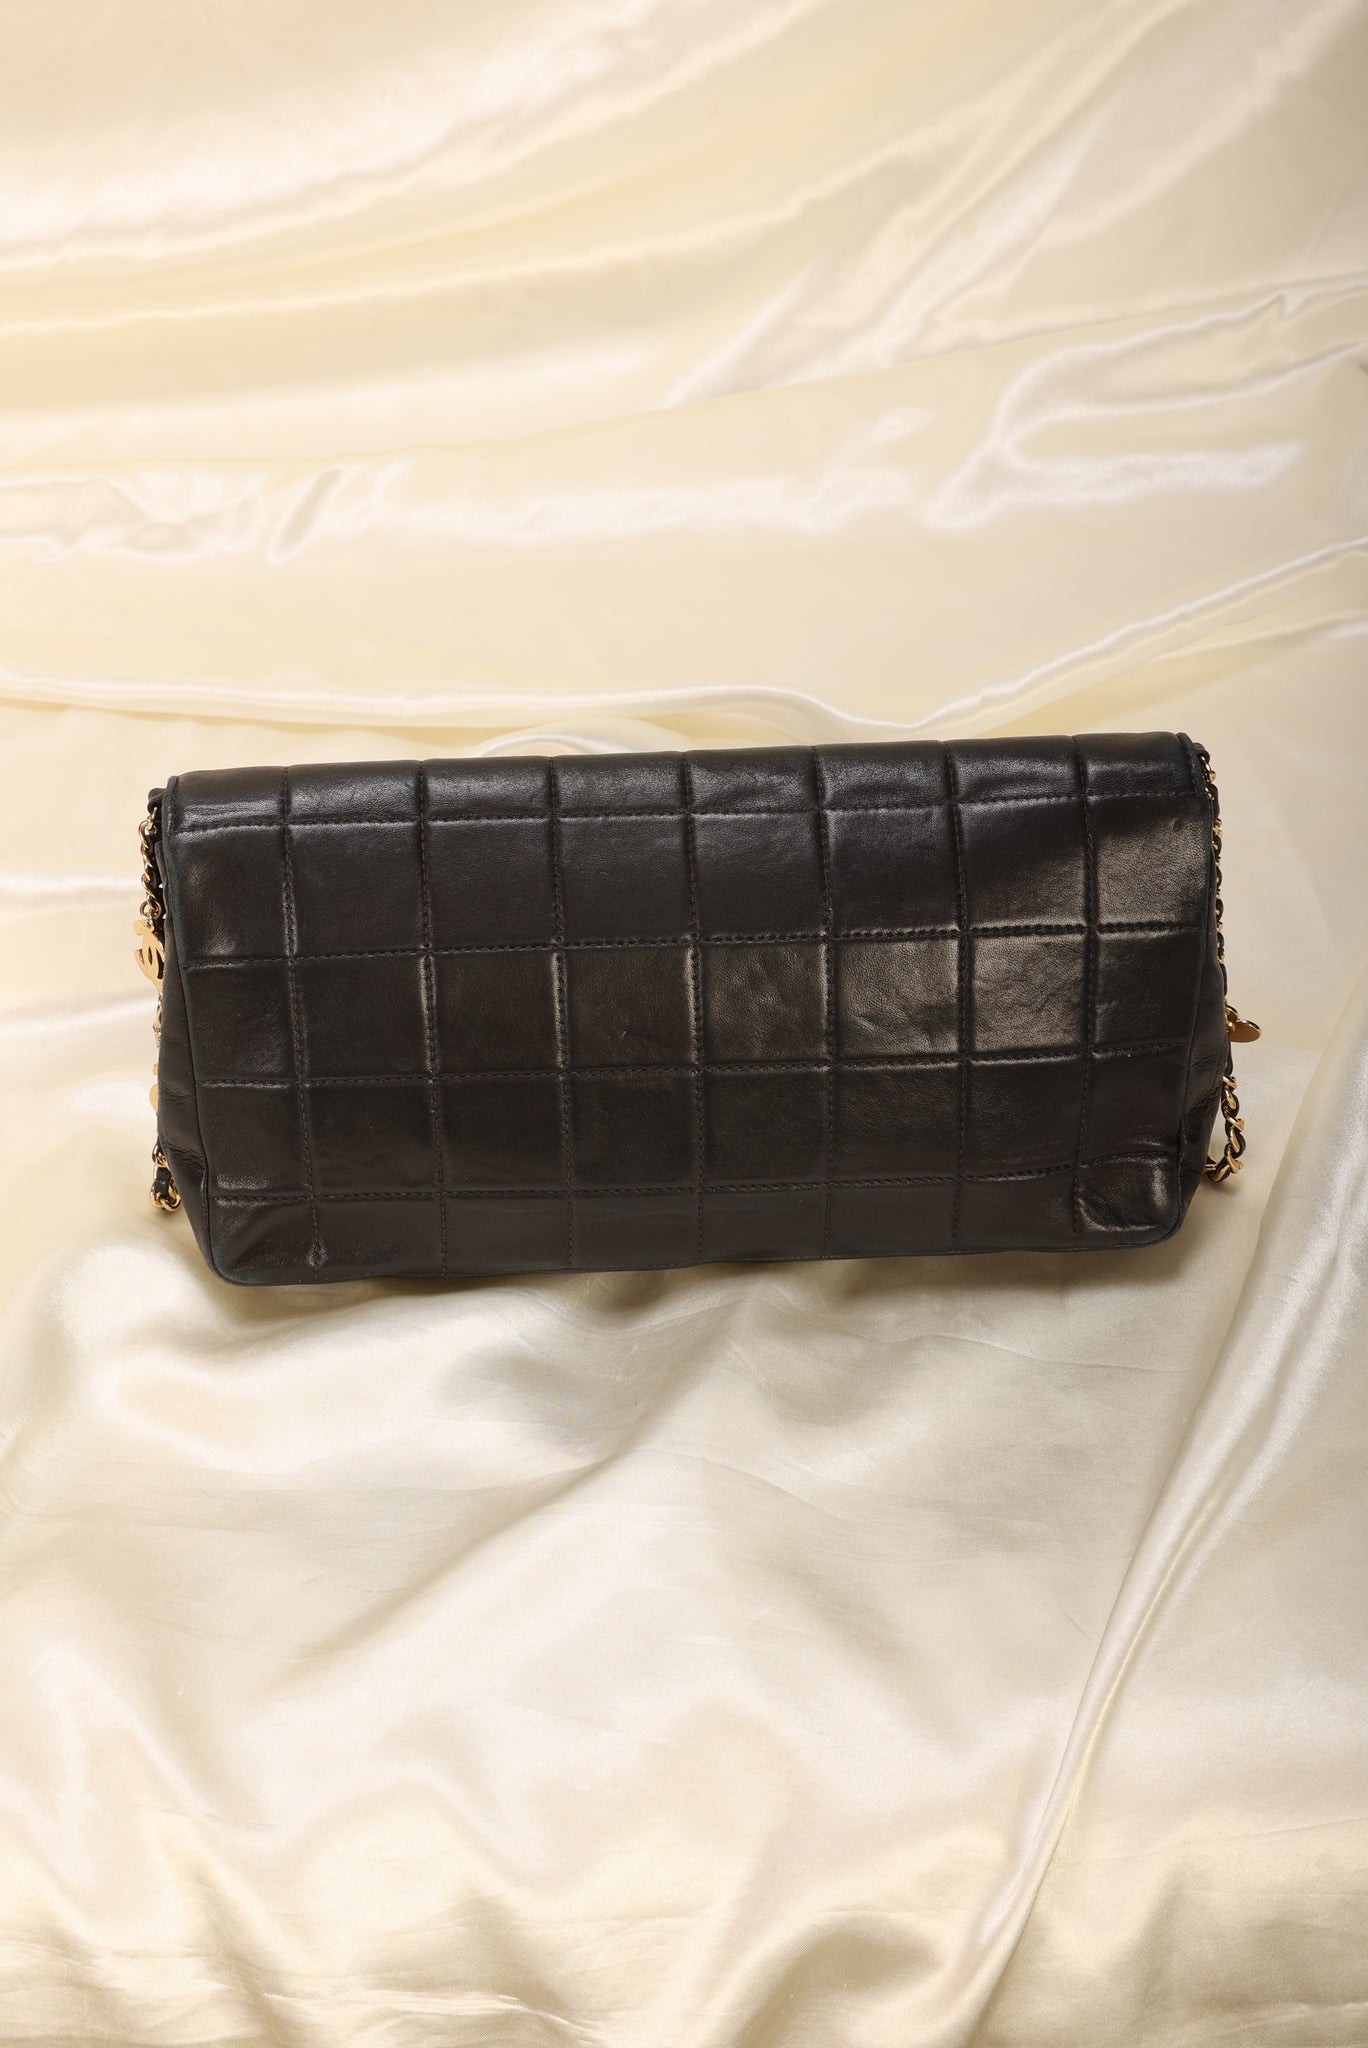 Extremely Rare Chanel Lambskin Charm Chocolate Bar